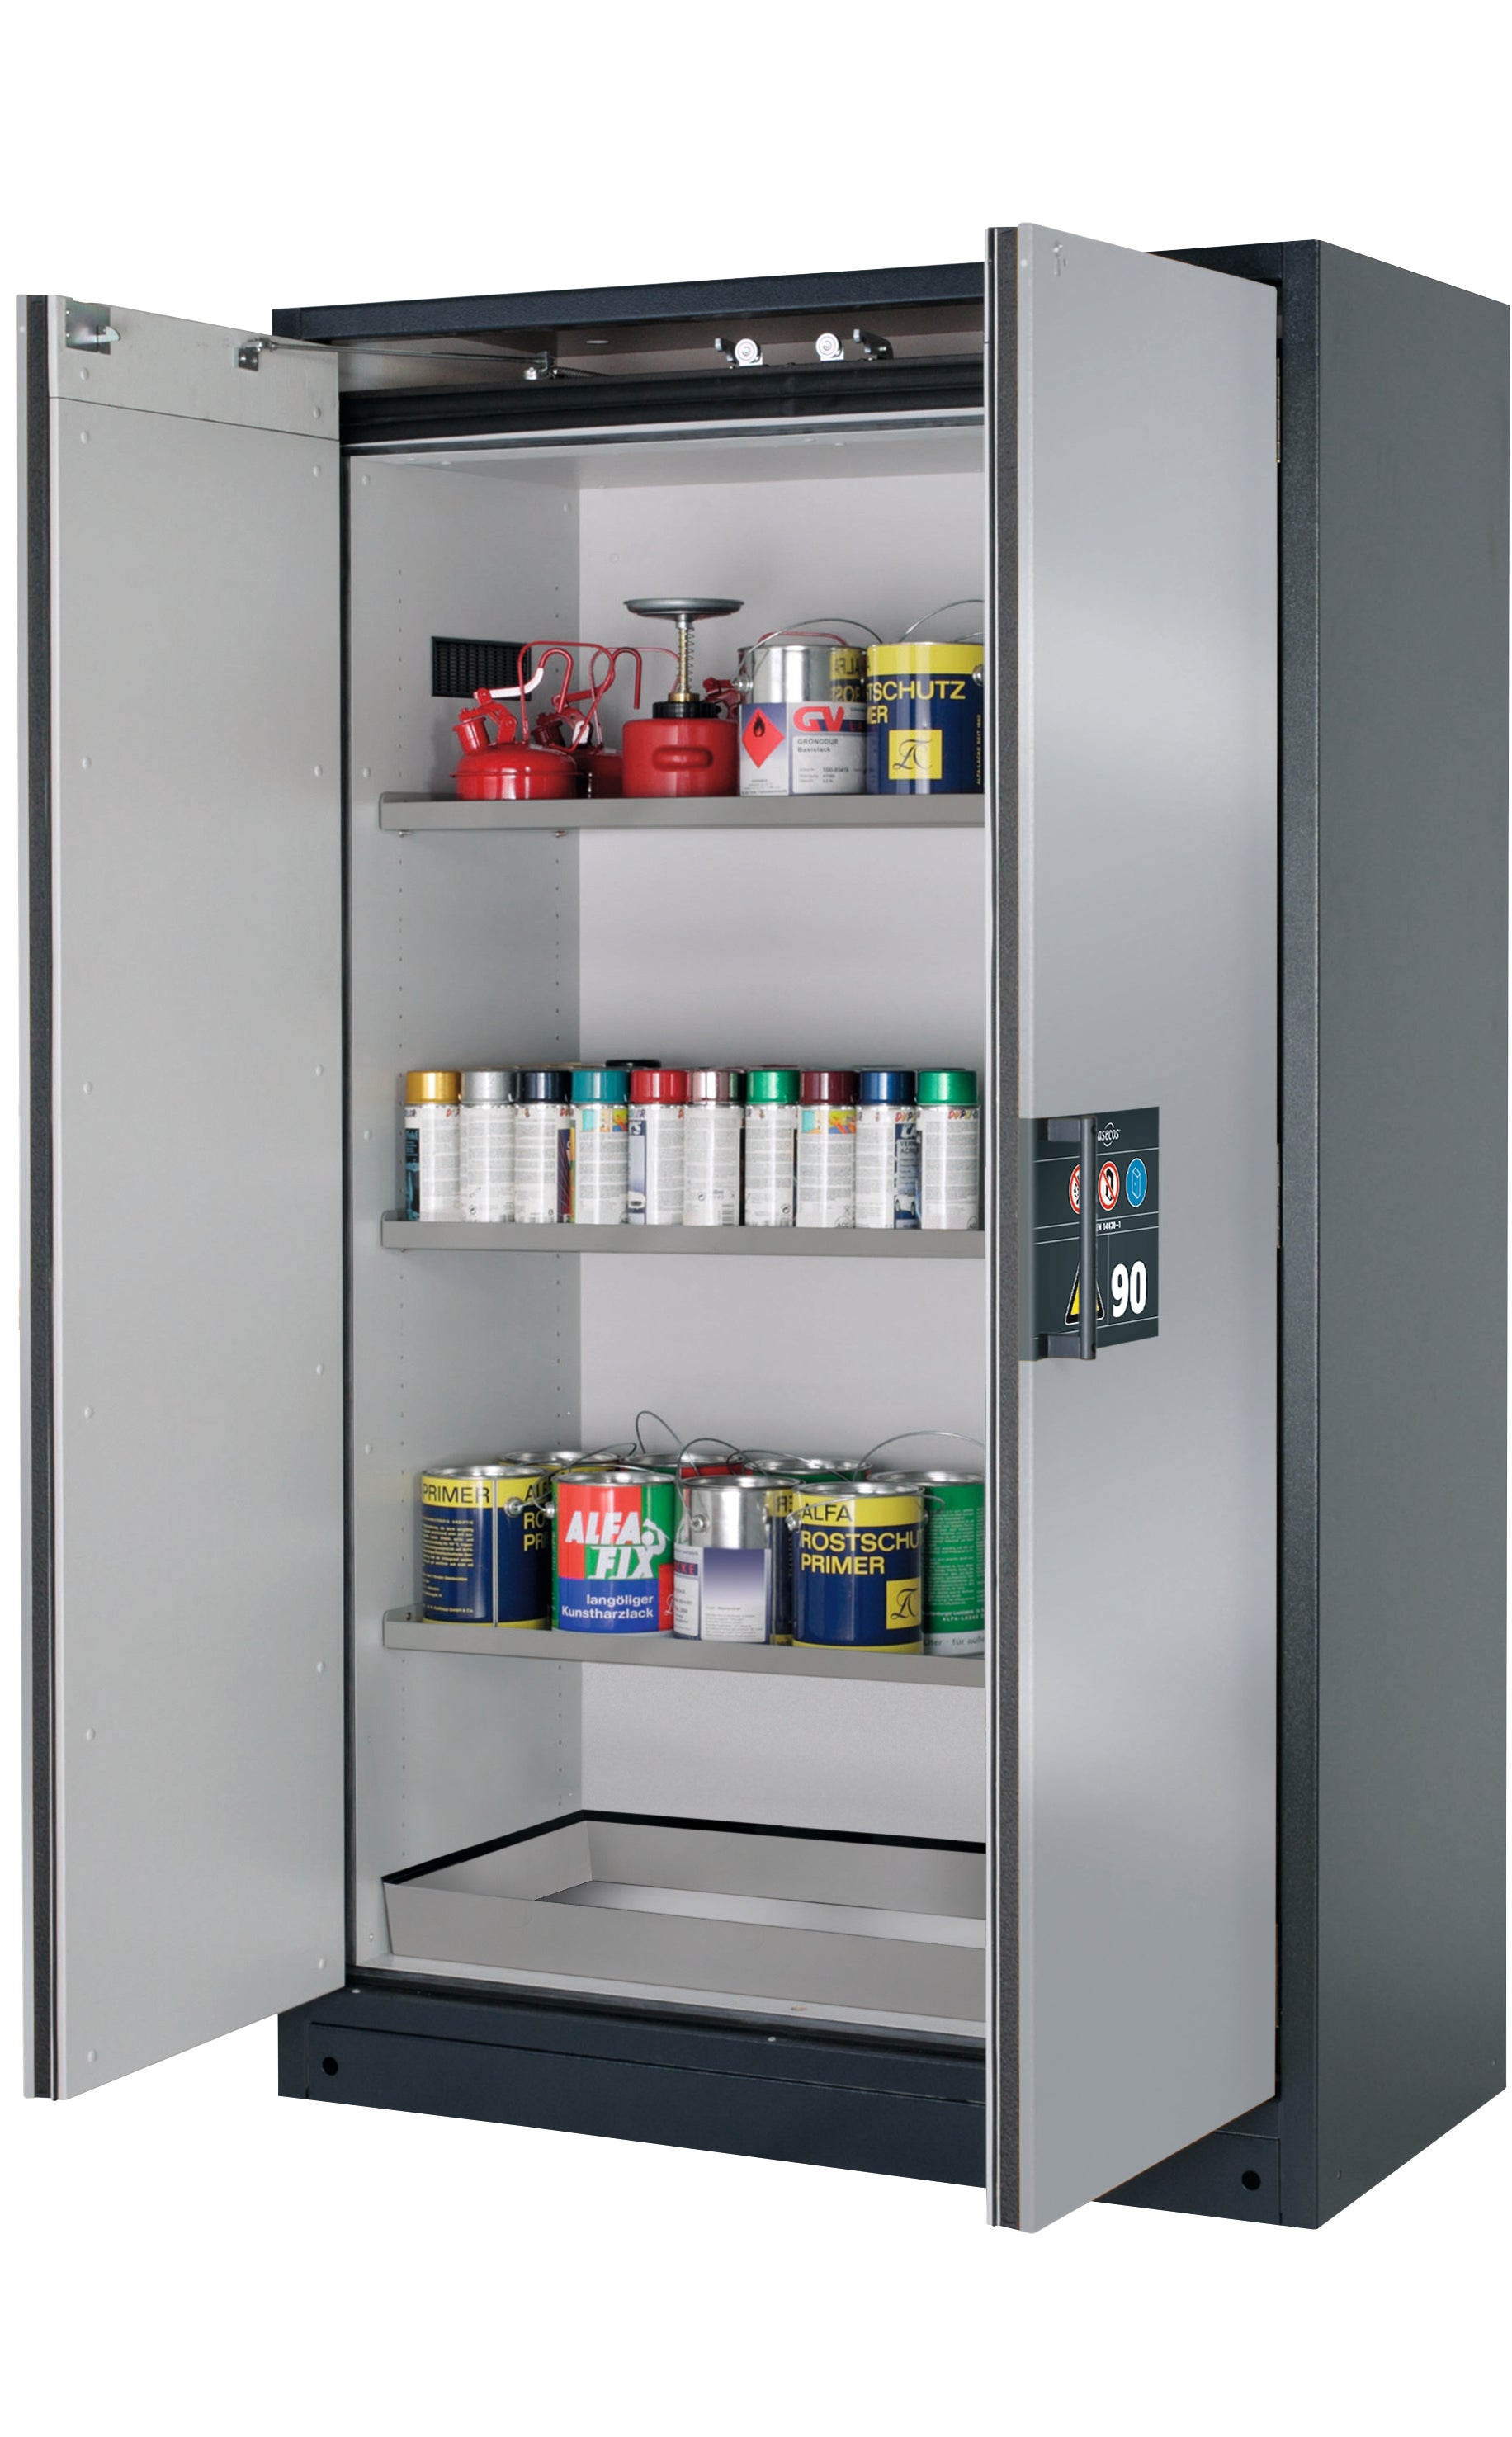 Type 90 safety storage cabinet Q-CLASSIC-90 model Q90.195.120 in asecos silver with 3x shelf standard (stainless steel 1.4301),